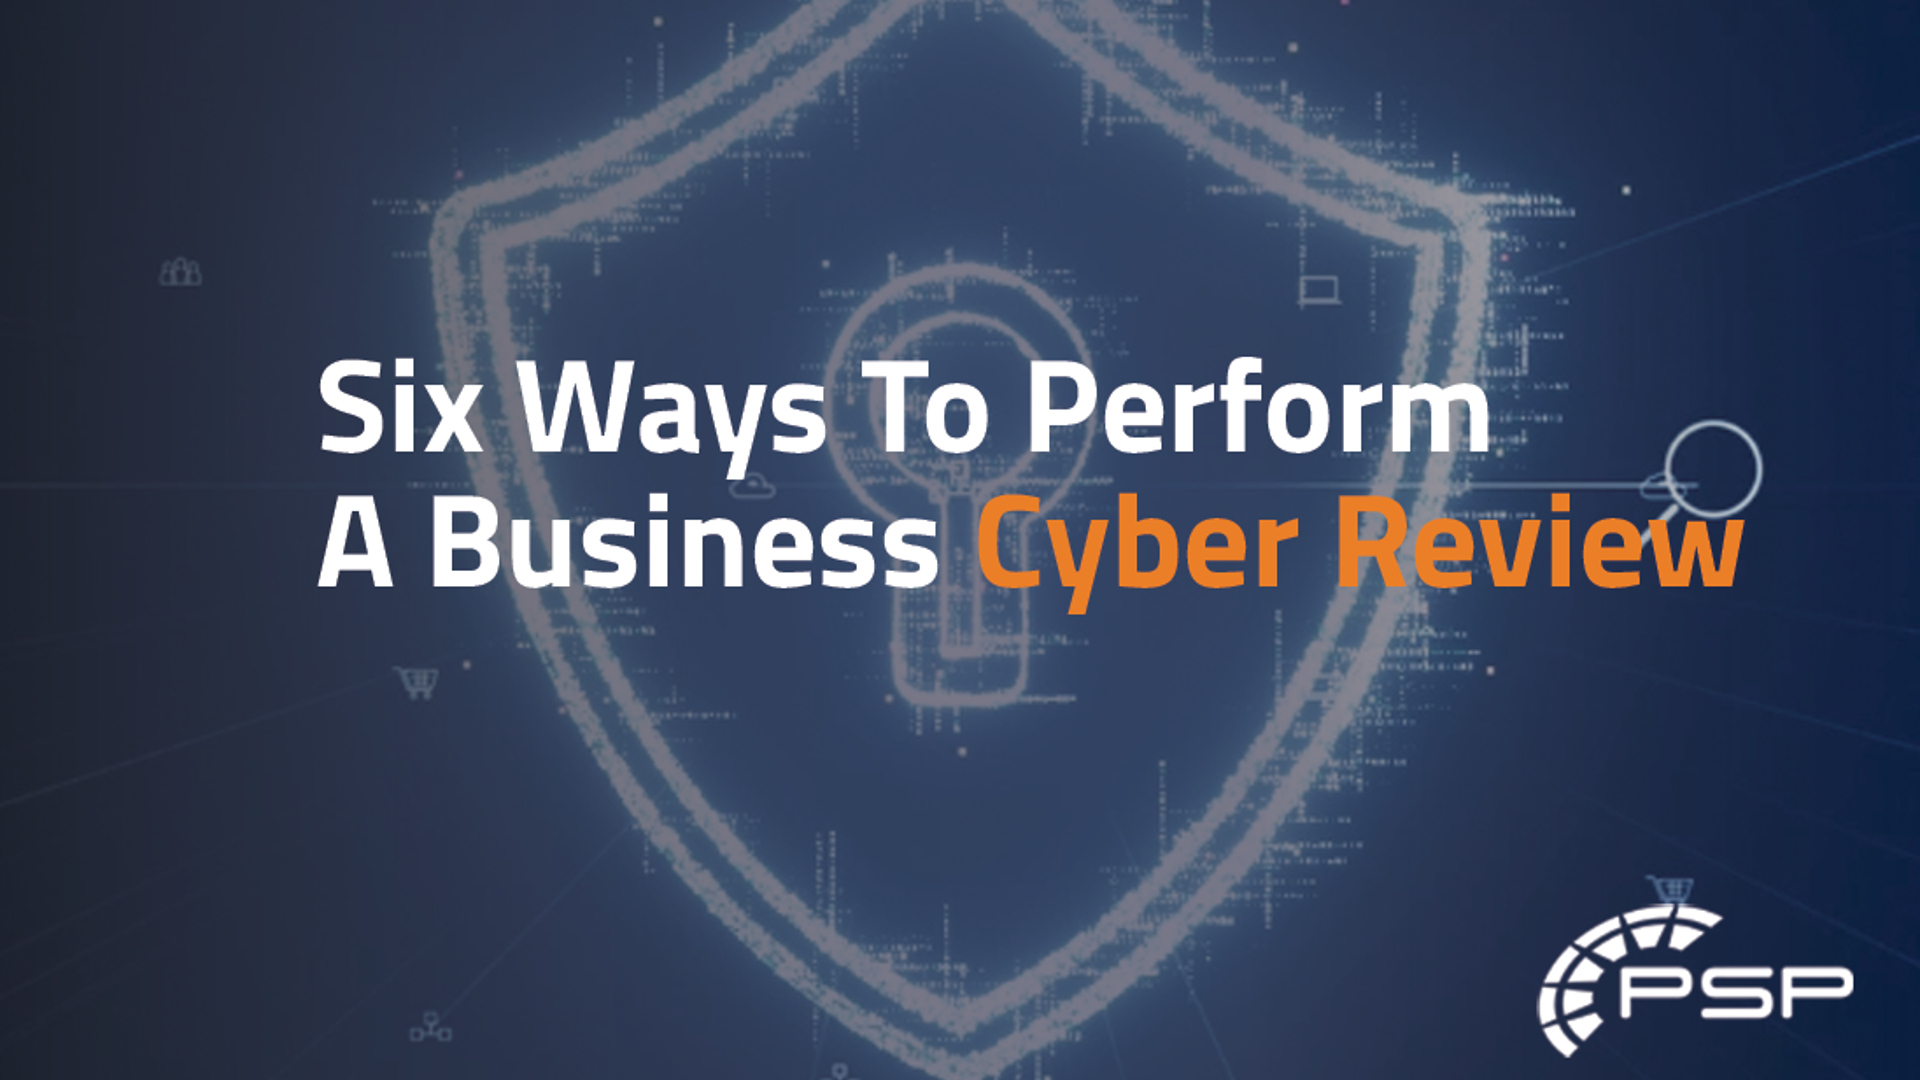 Six ways to perform a business cyber review